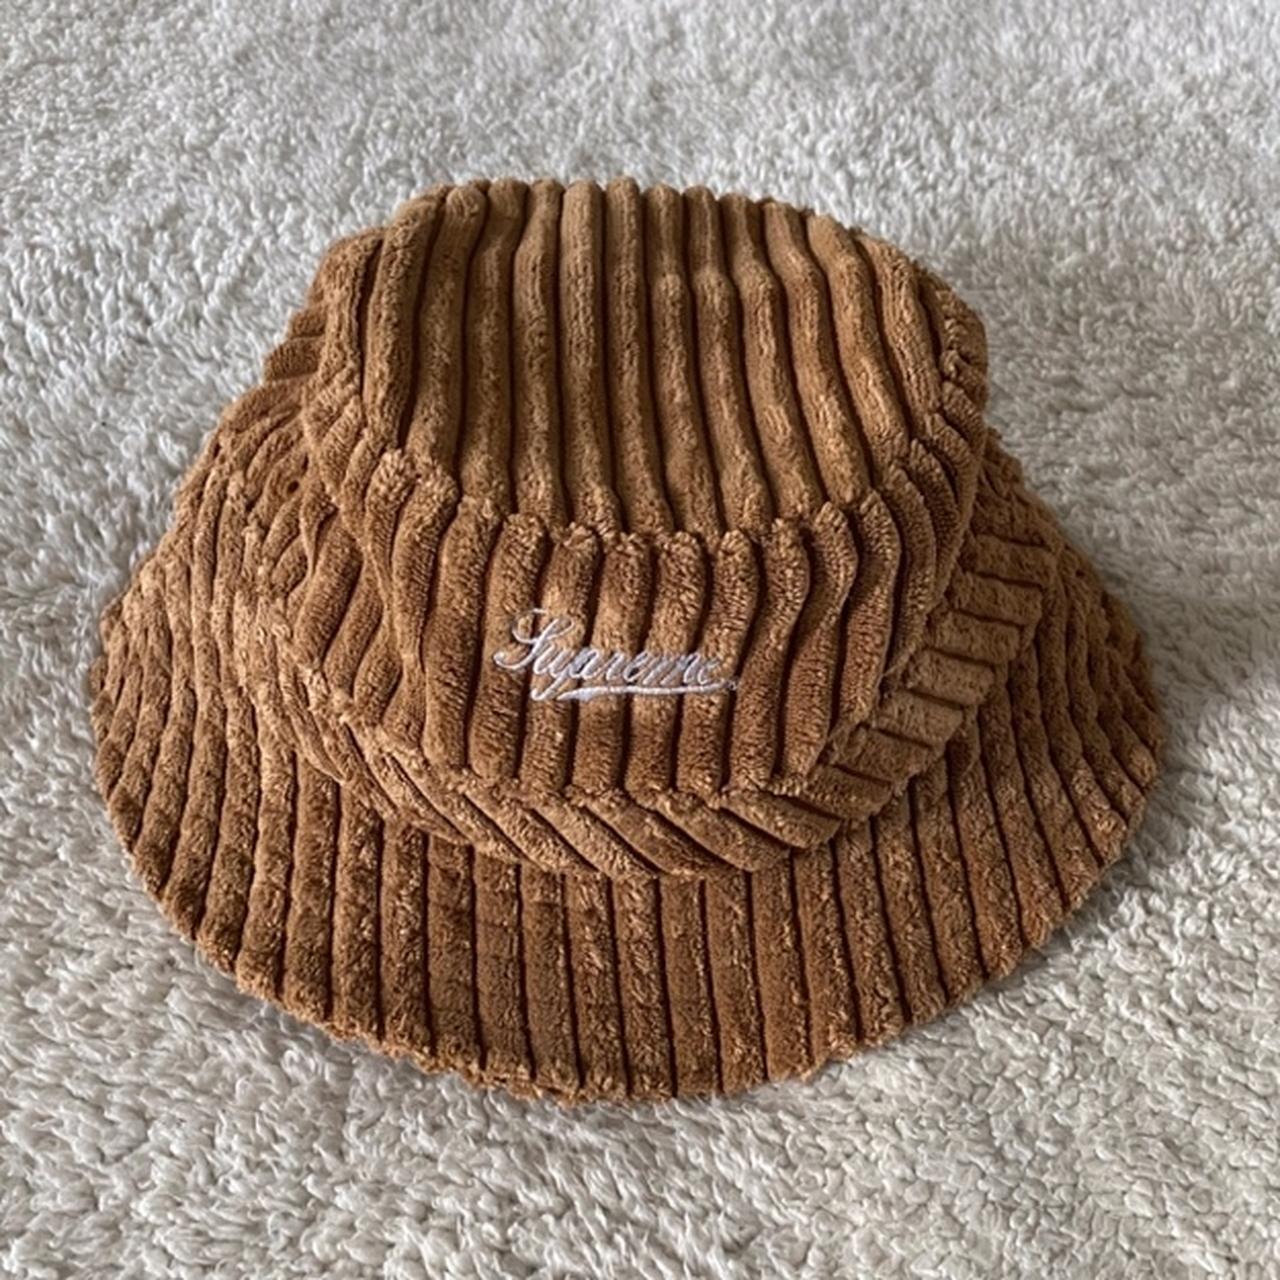 Supreme terry crusher bucket hat tan, Size...